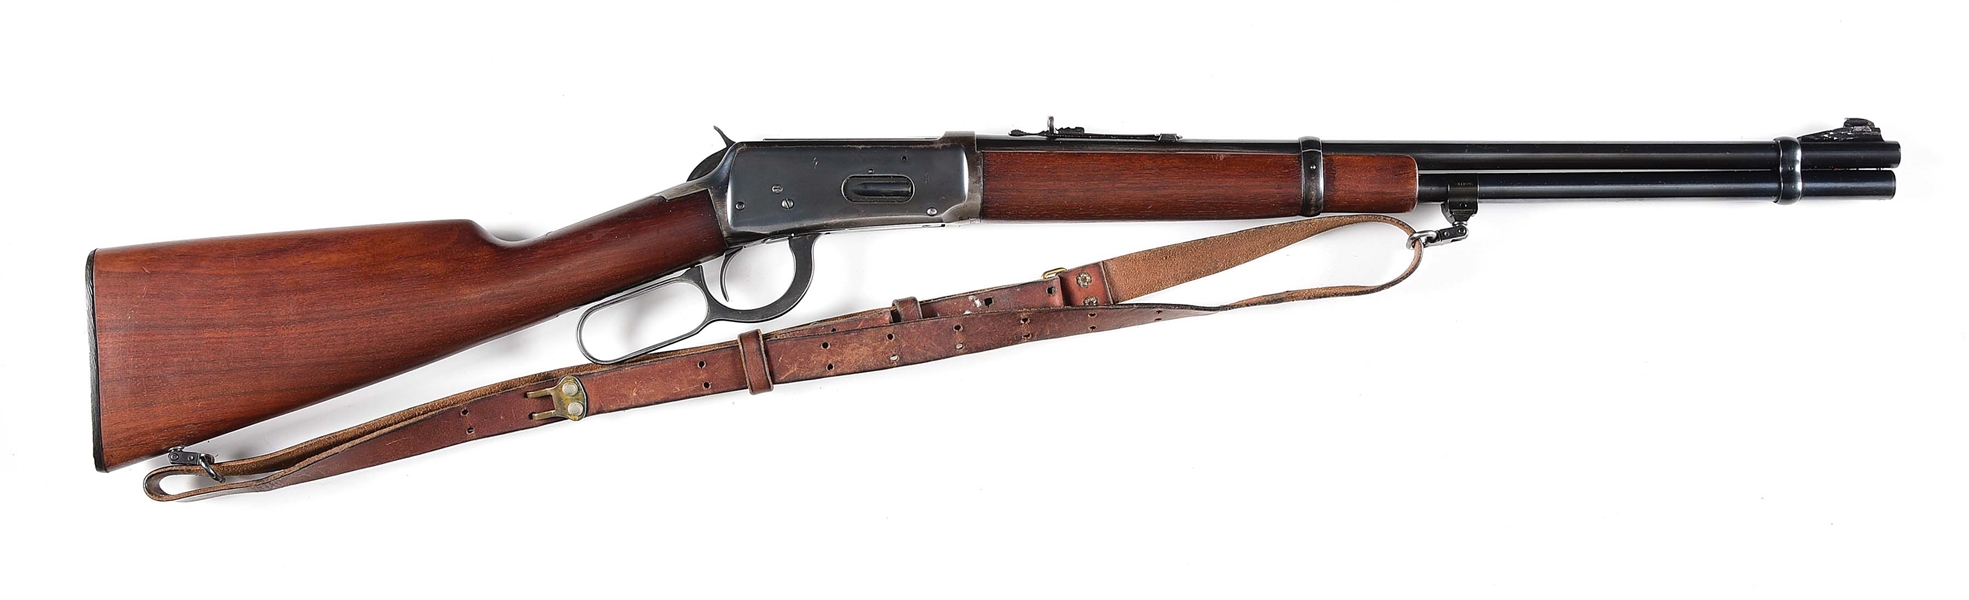 (C) WINCHESTER MODEL 1894 LEVER ACTION RIFLE (1950).